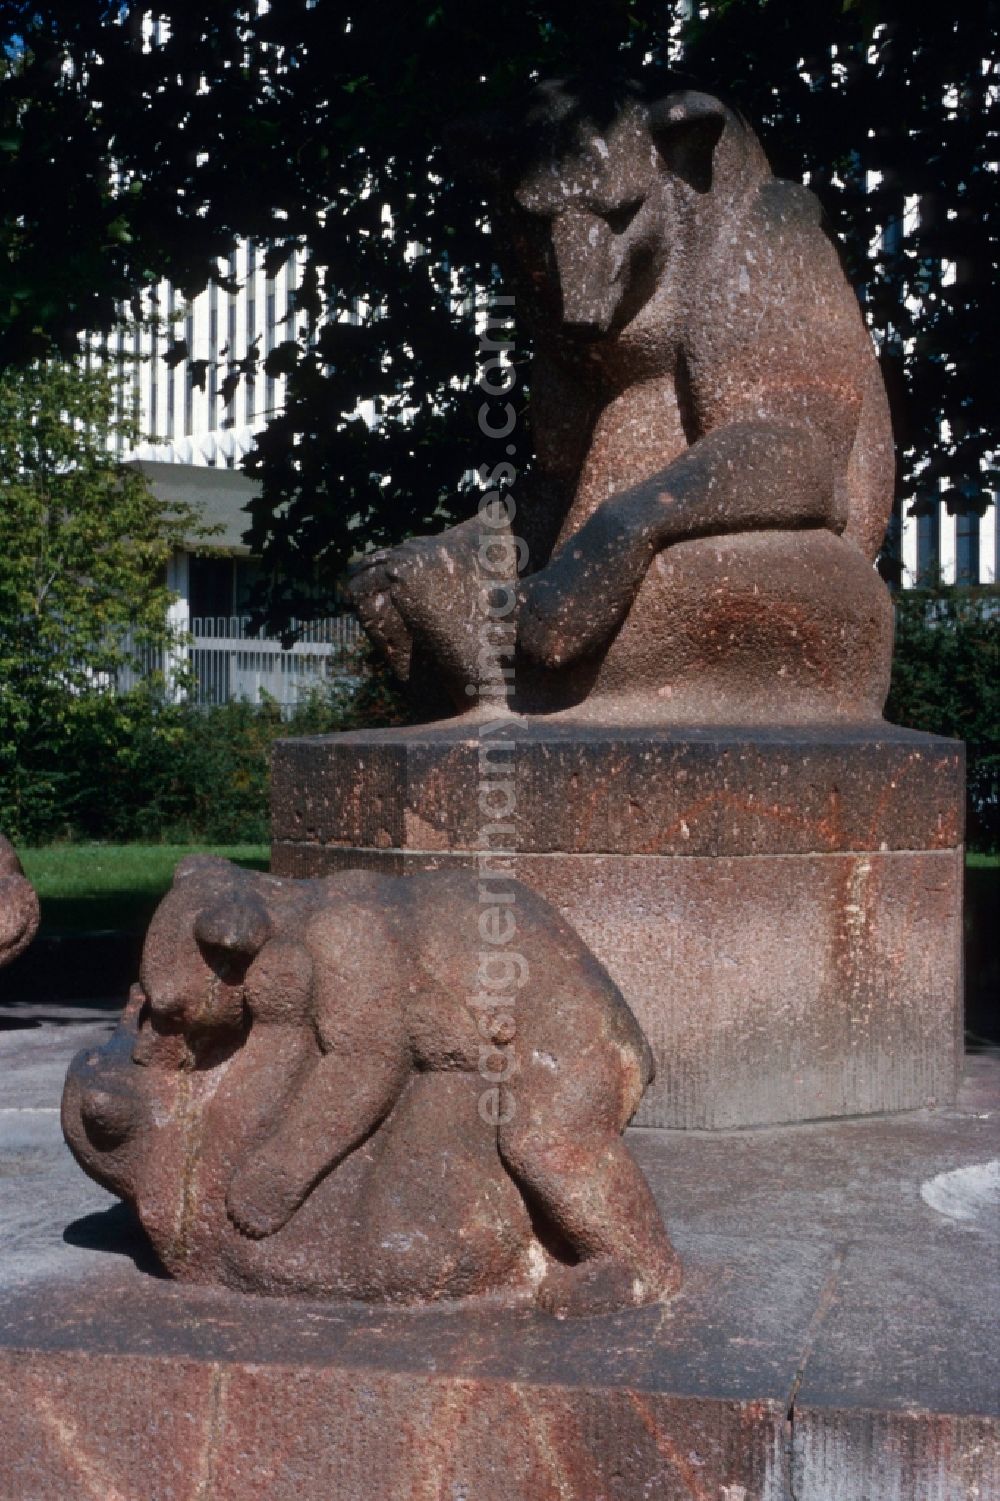 GDR picture archive: Berlin - Mitte - The bear-fountain in Berlin - Mitte is a fountain, which is the heraldic animal of Berlin as a family. The fountain is located at Werderscher Market